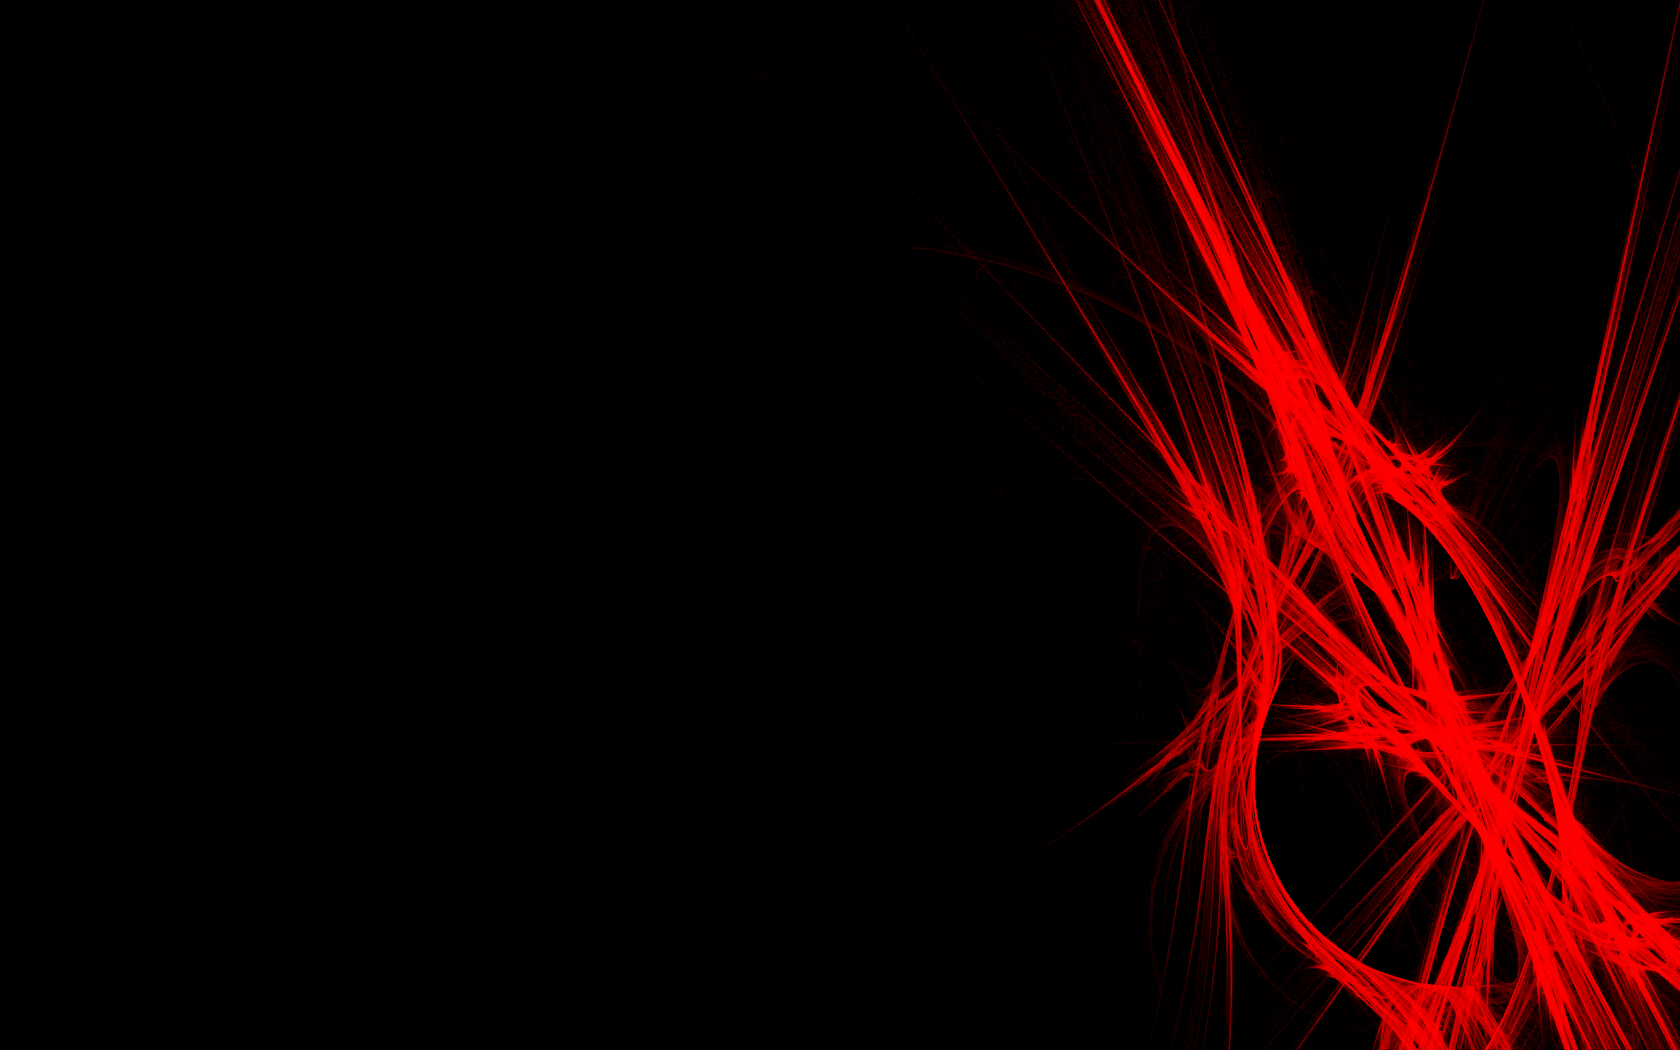 Amazing Graphic Design Background | Red and Black BackgroundHD